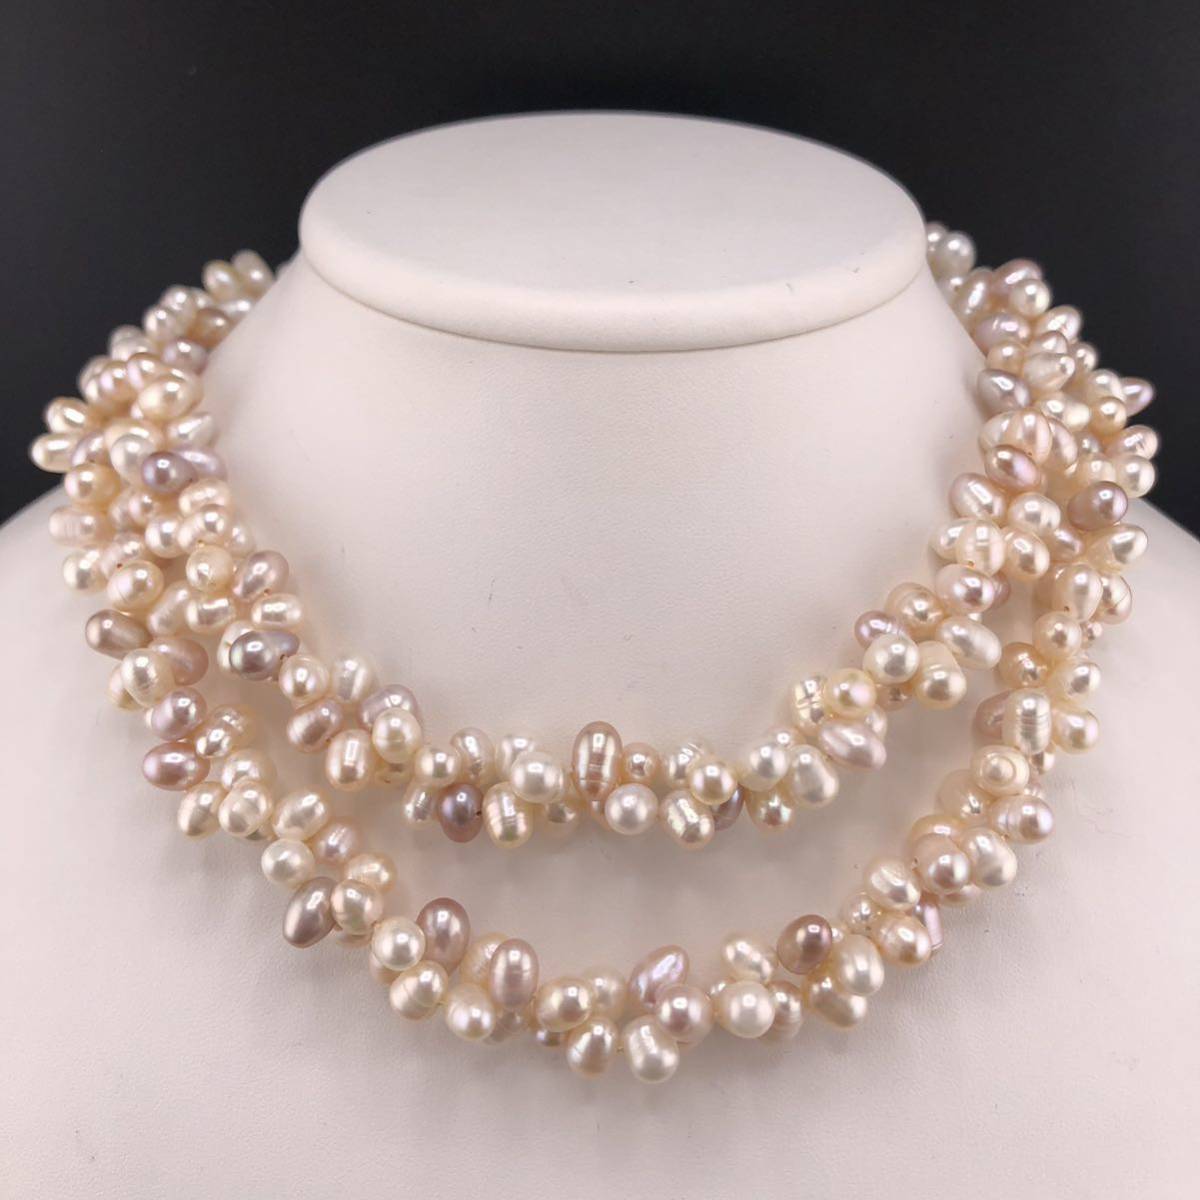 P03-0048★淡水ロングパールネックレス 約84cm 153g ( 淡水真珠 Pearl necklace accessory )_画像1